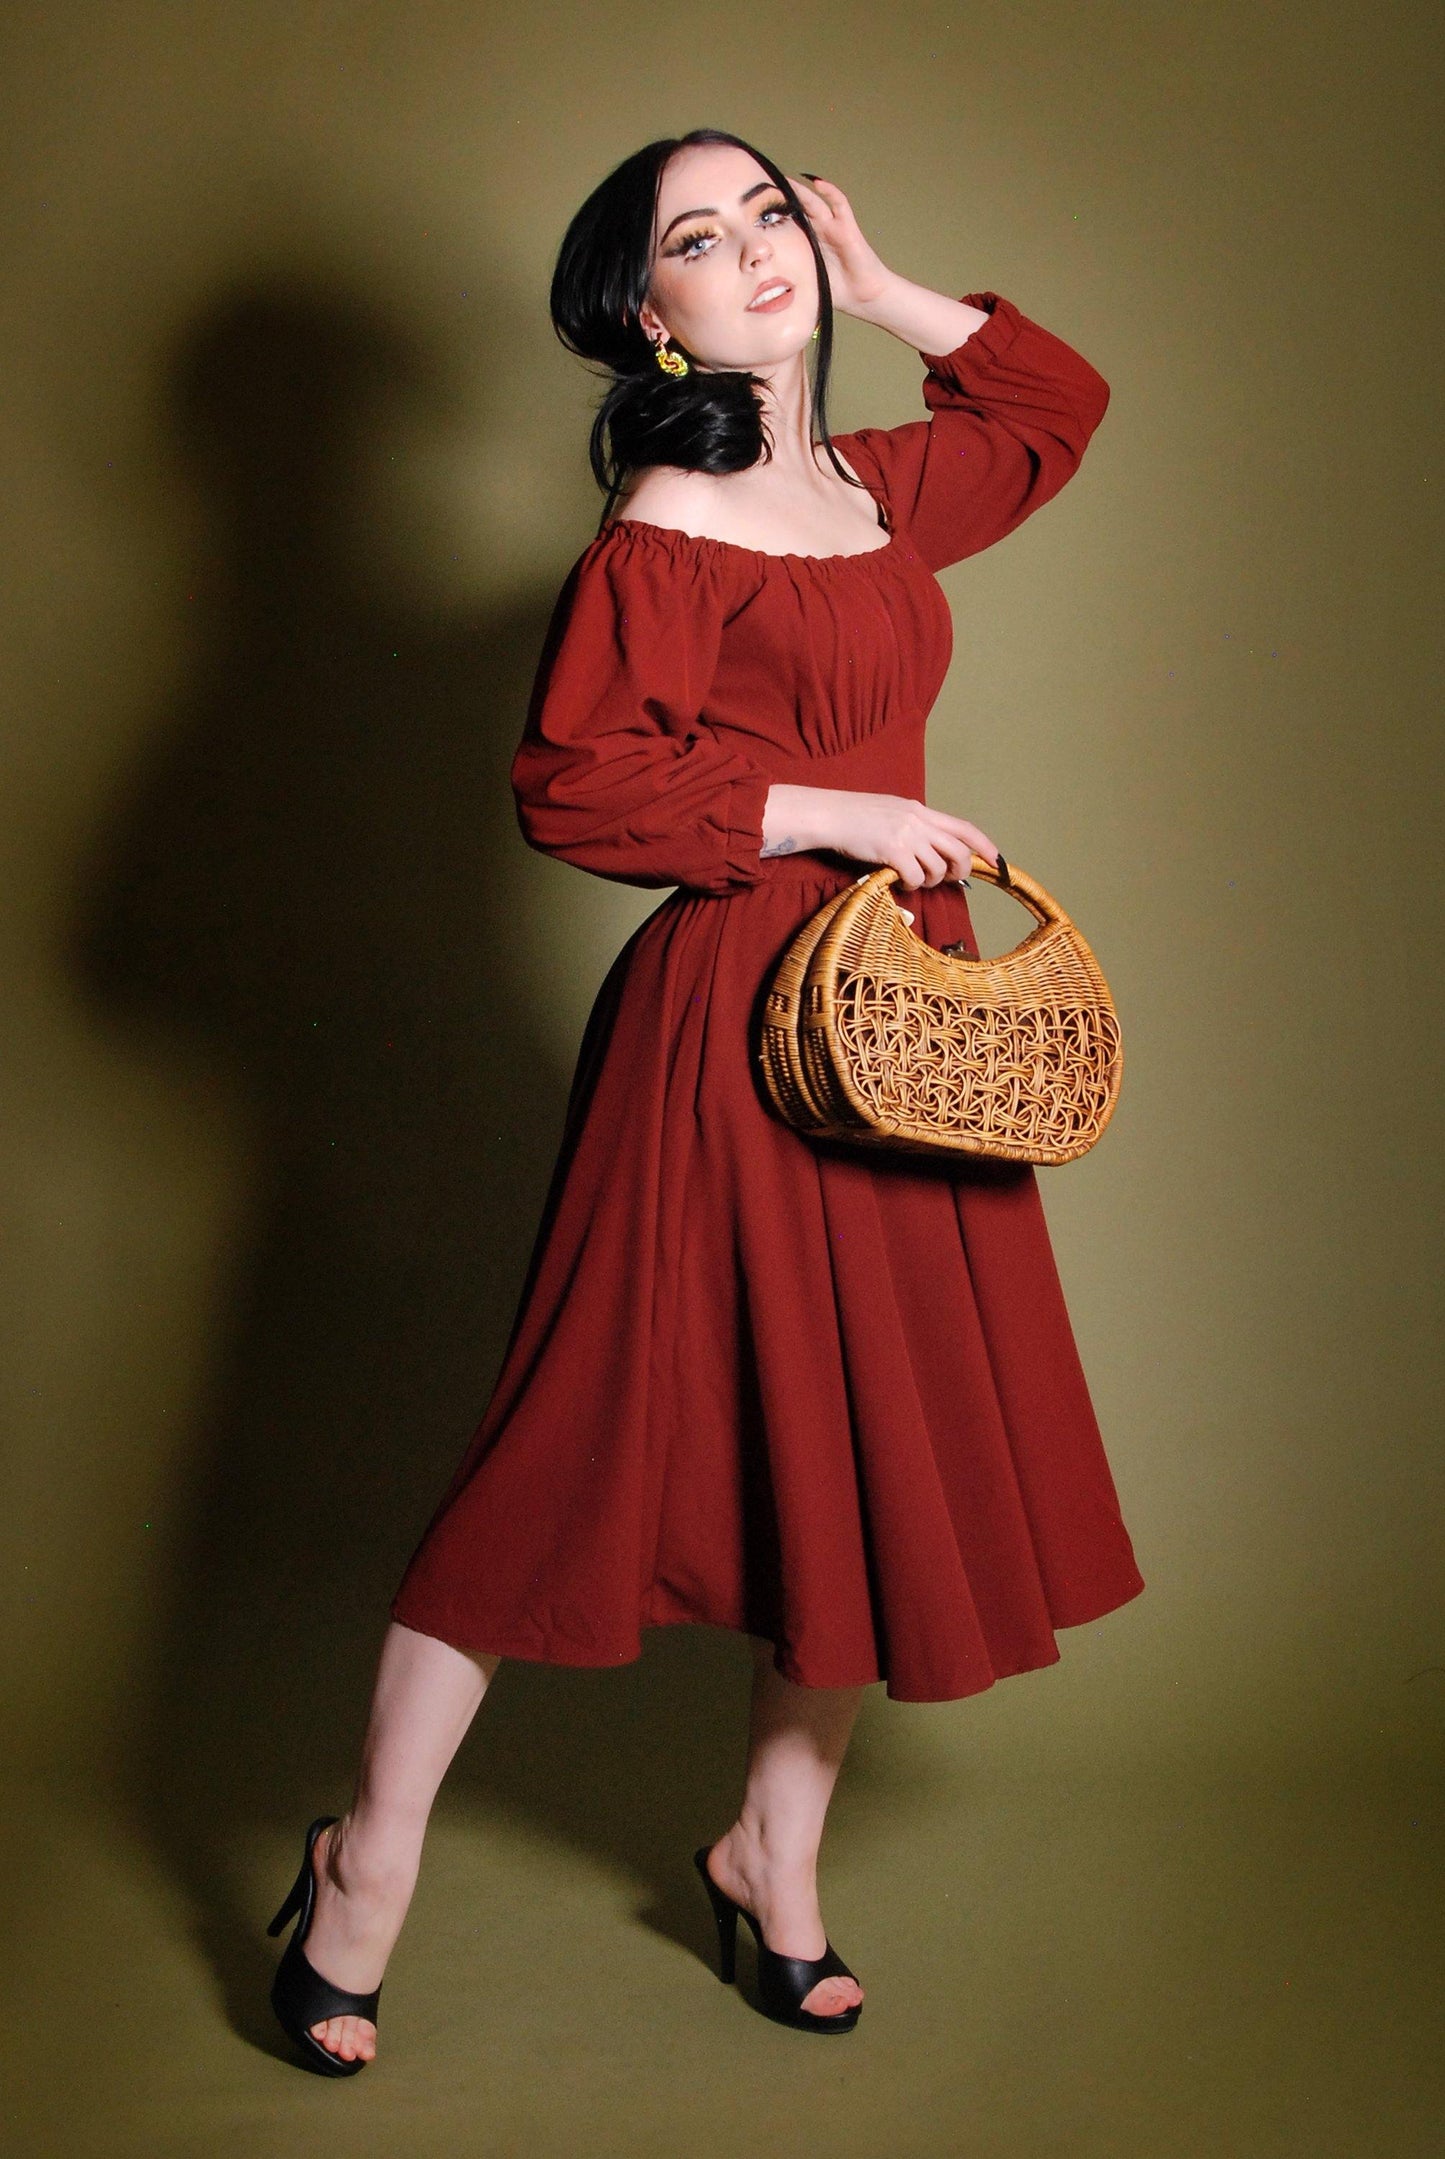 Marie-Thérèse Peasant Dress in Merlot Poly Crepe | Pinup Couture - pinupgirlclothing.com